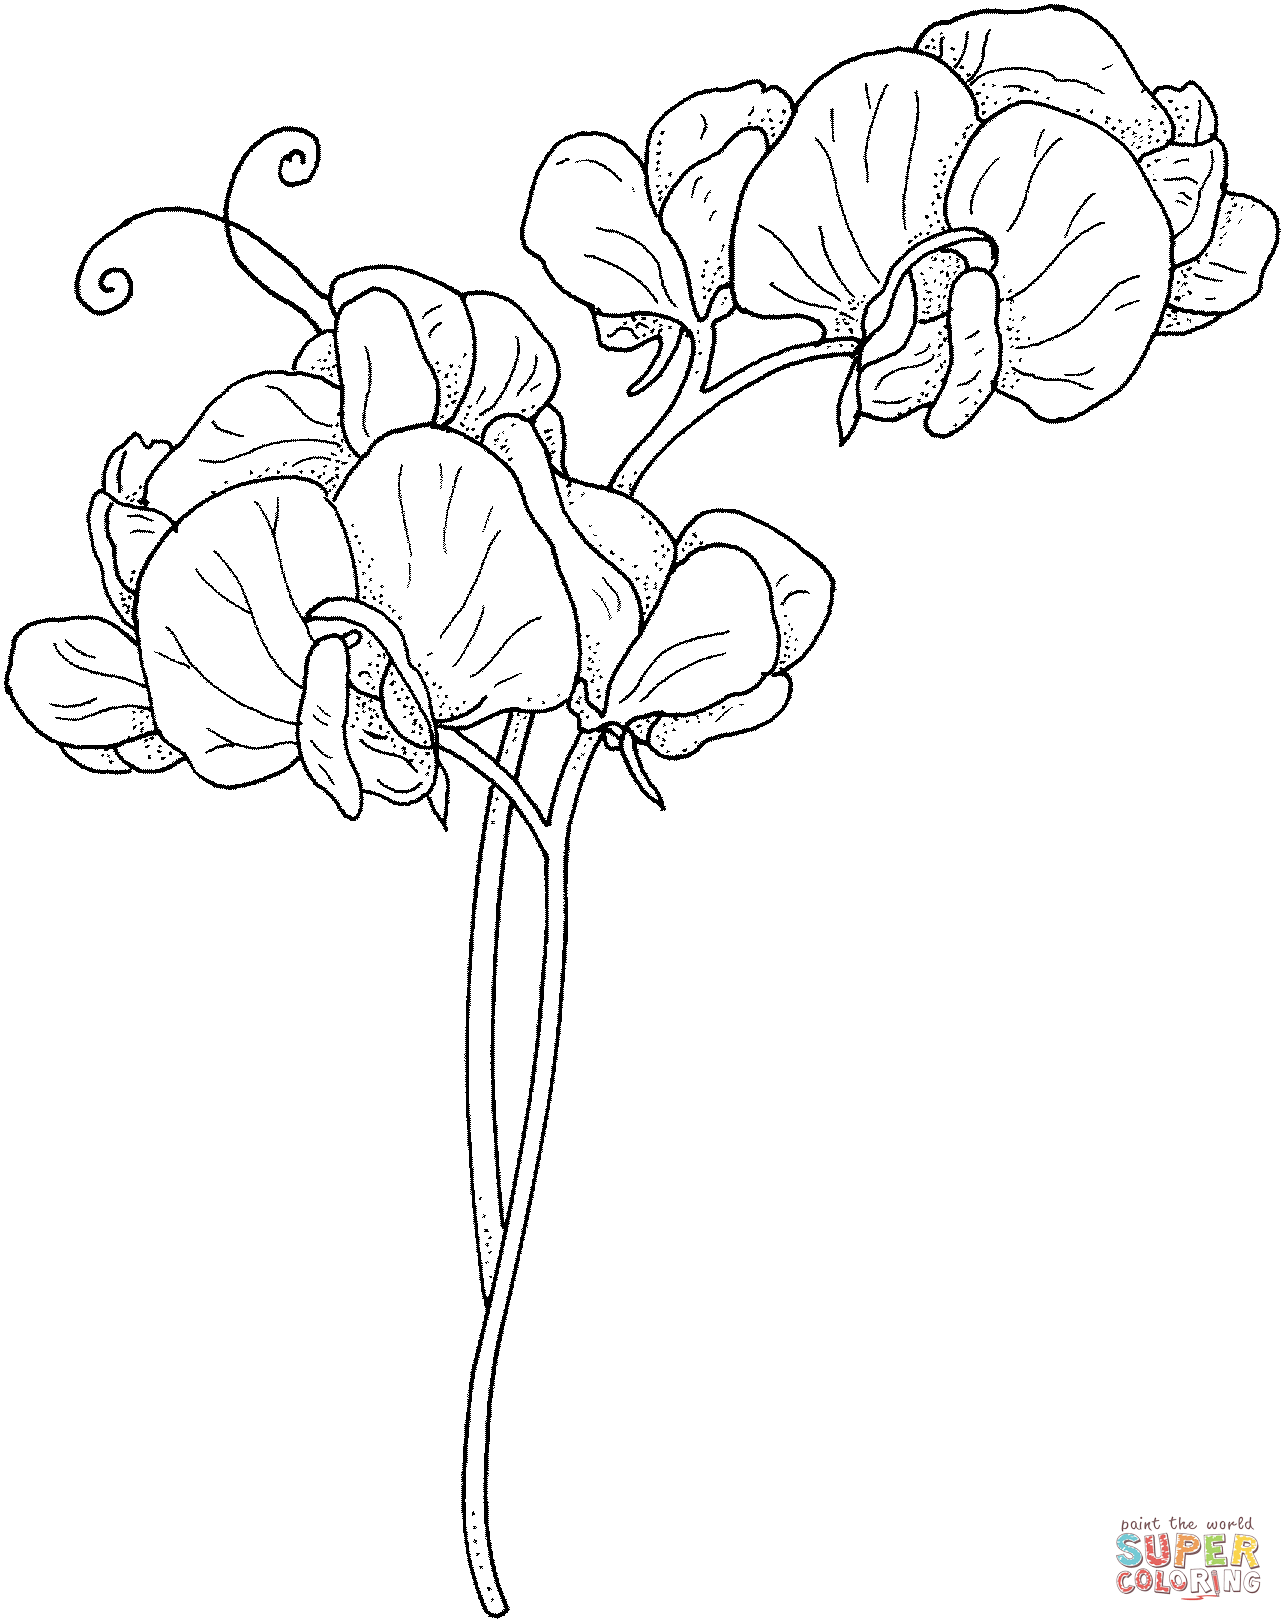 Sweet Pea Vine coloring page